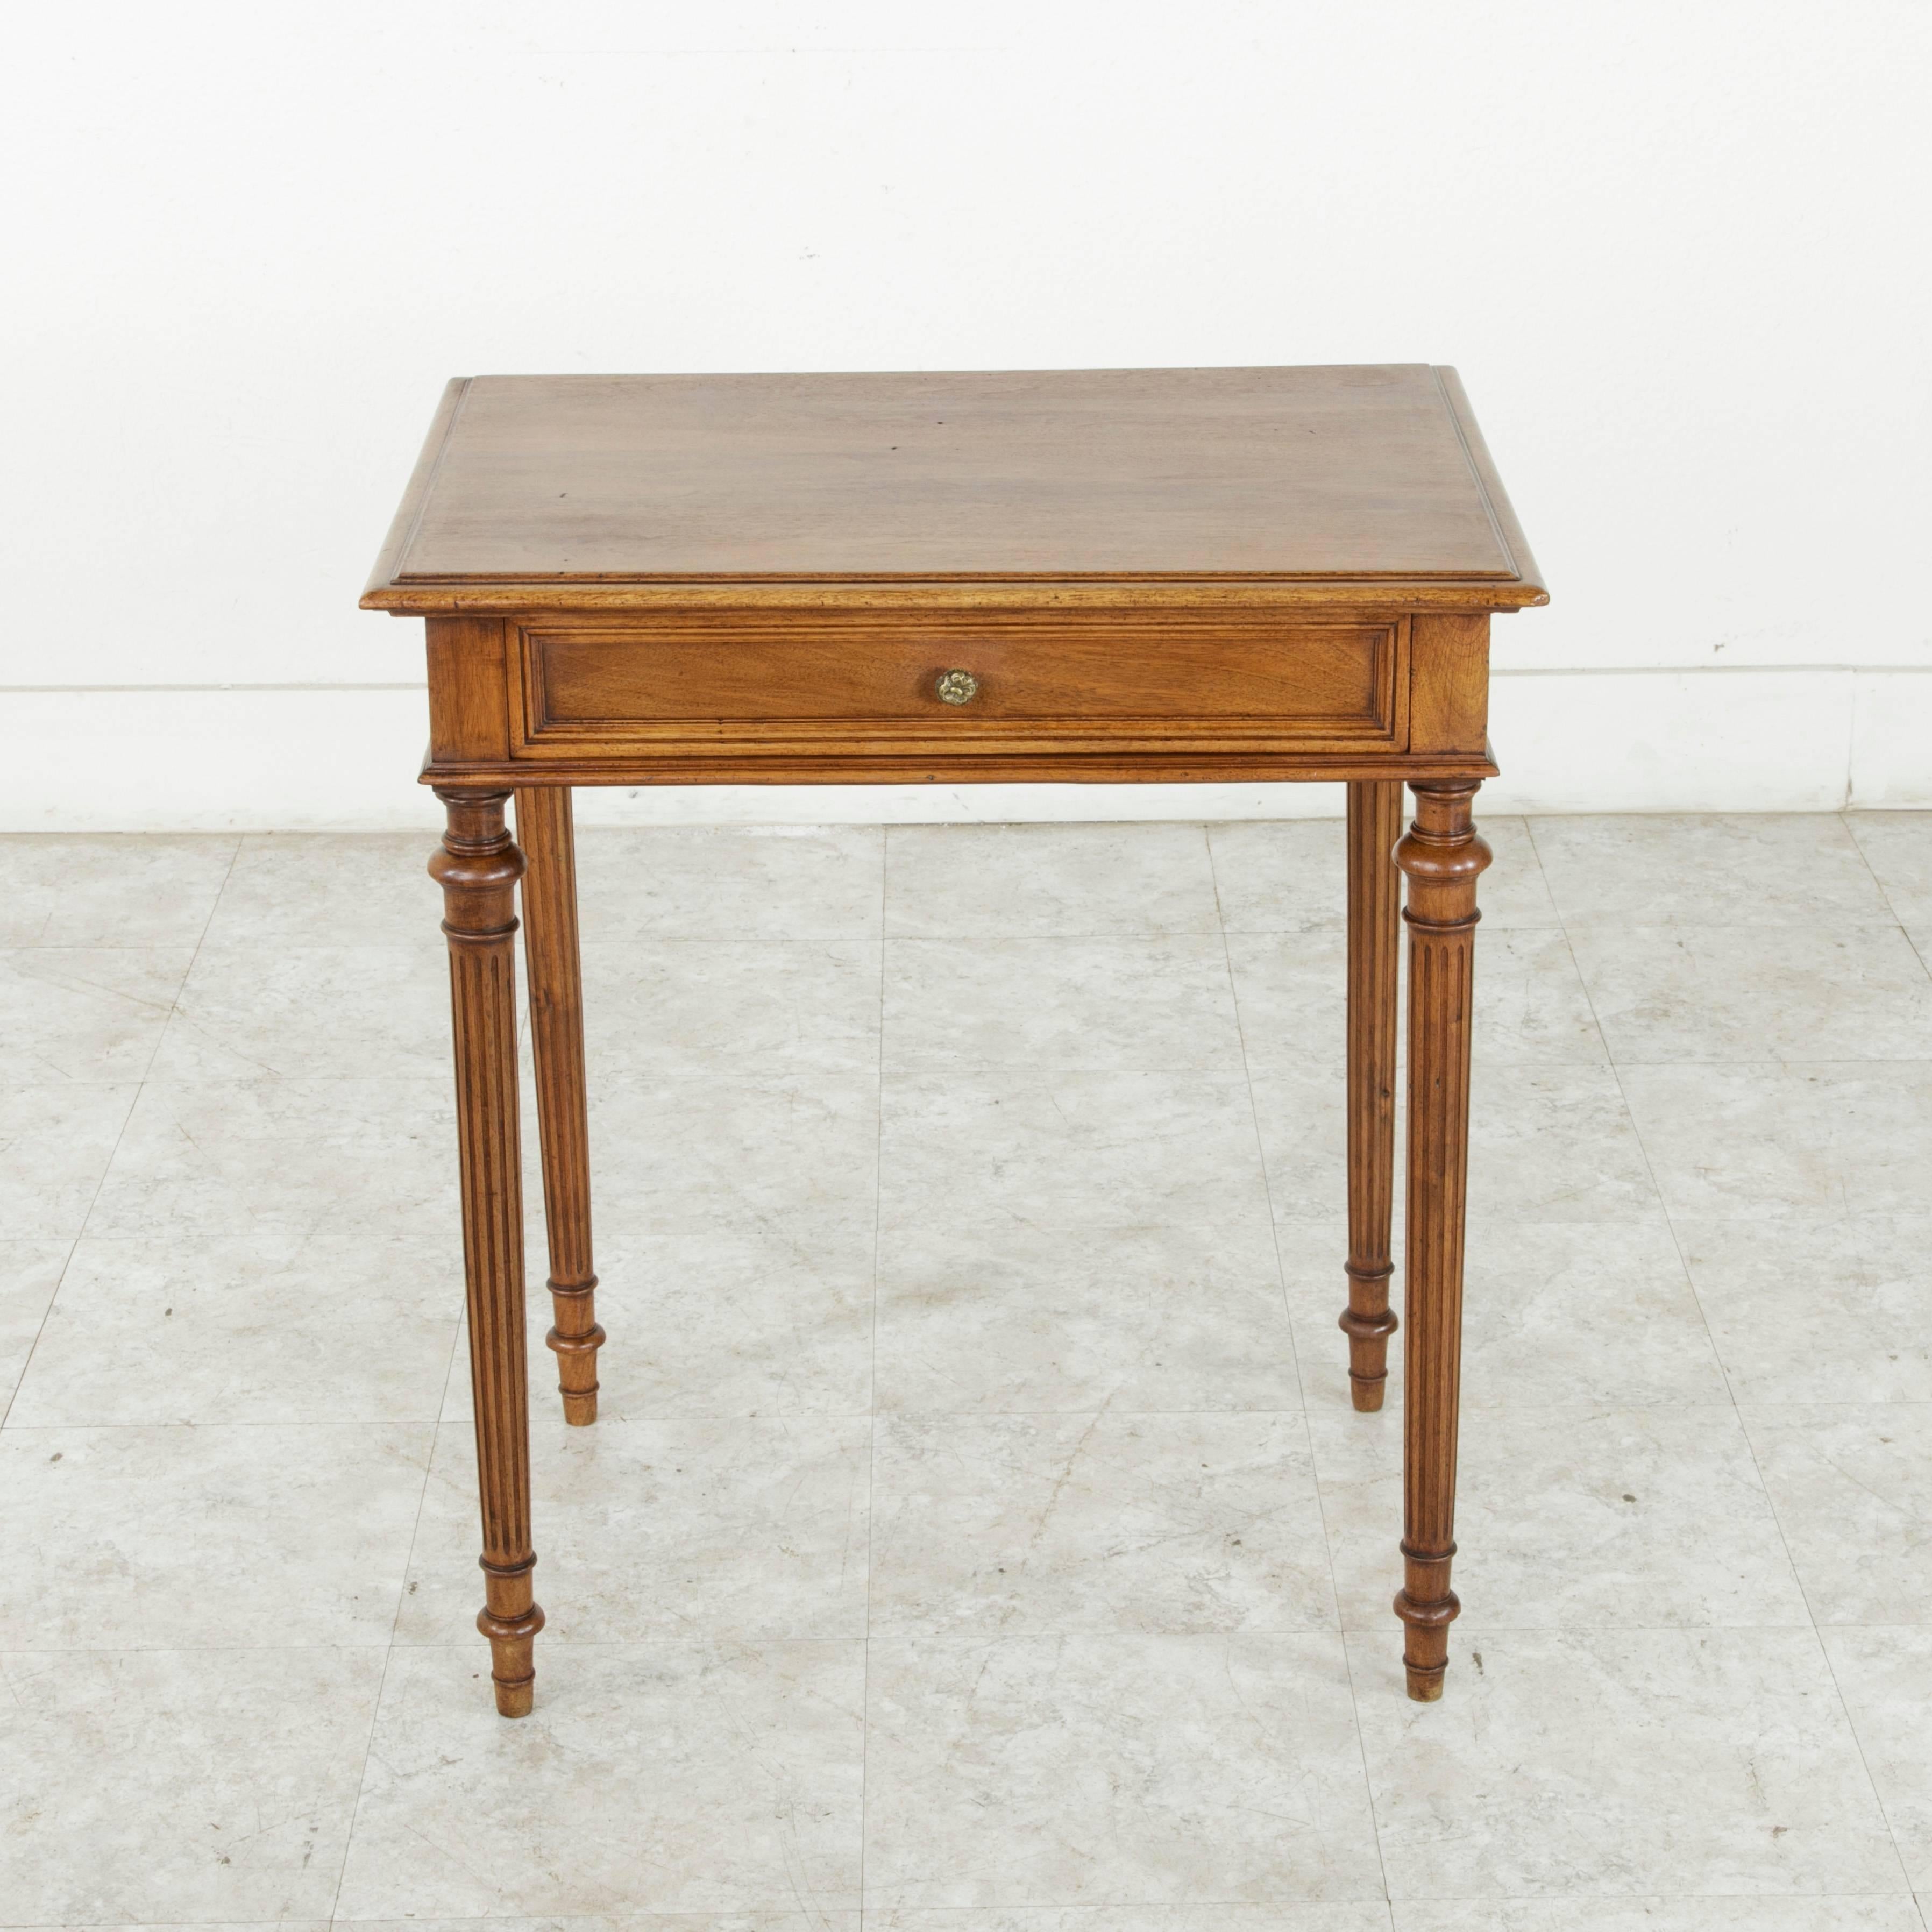 This small-scale French Louis XVI style walnut side table from the turn of the 20th century features classic tapered, fluted legs and a bevelled walnut top. A single drawer of dovetail construction with a bronze pull blends seamlessly with the